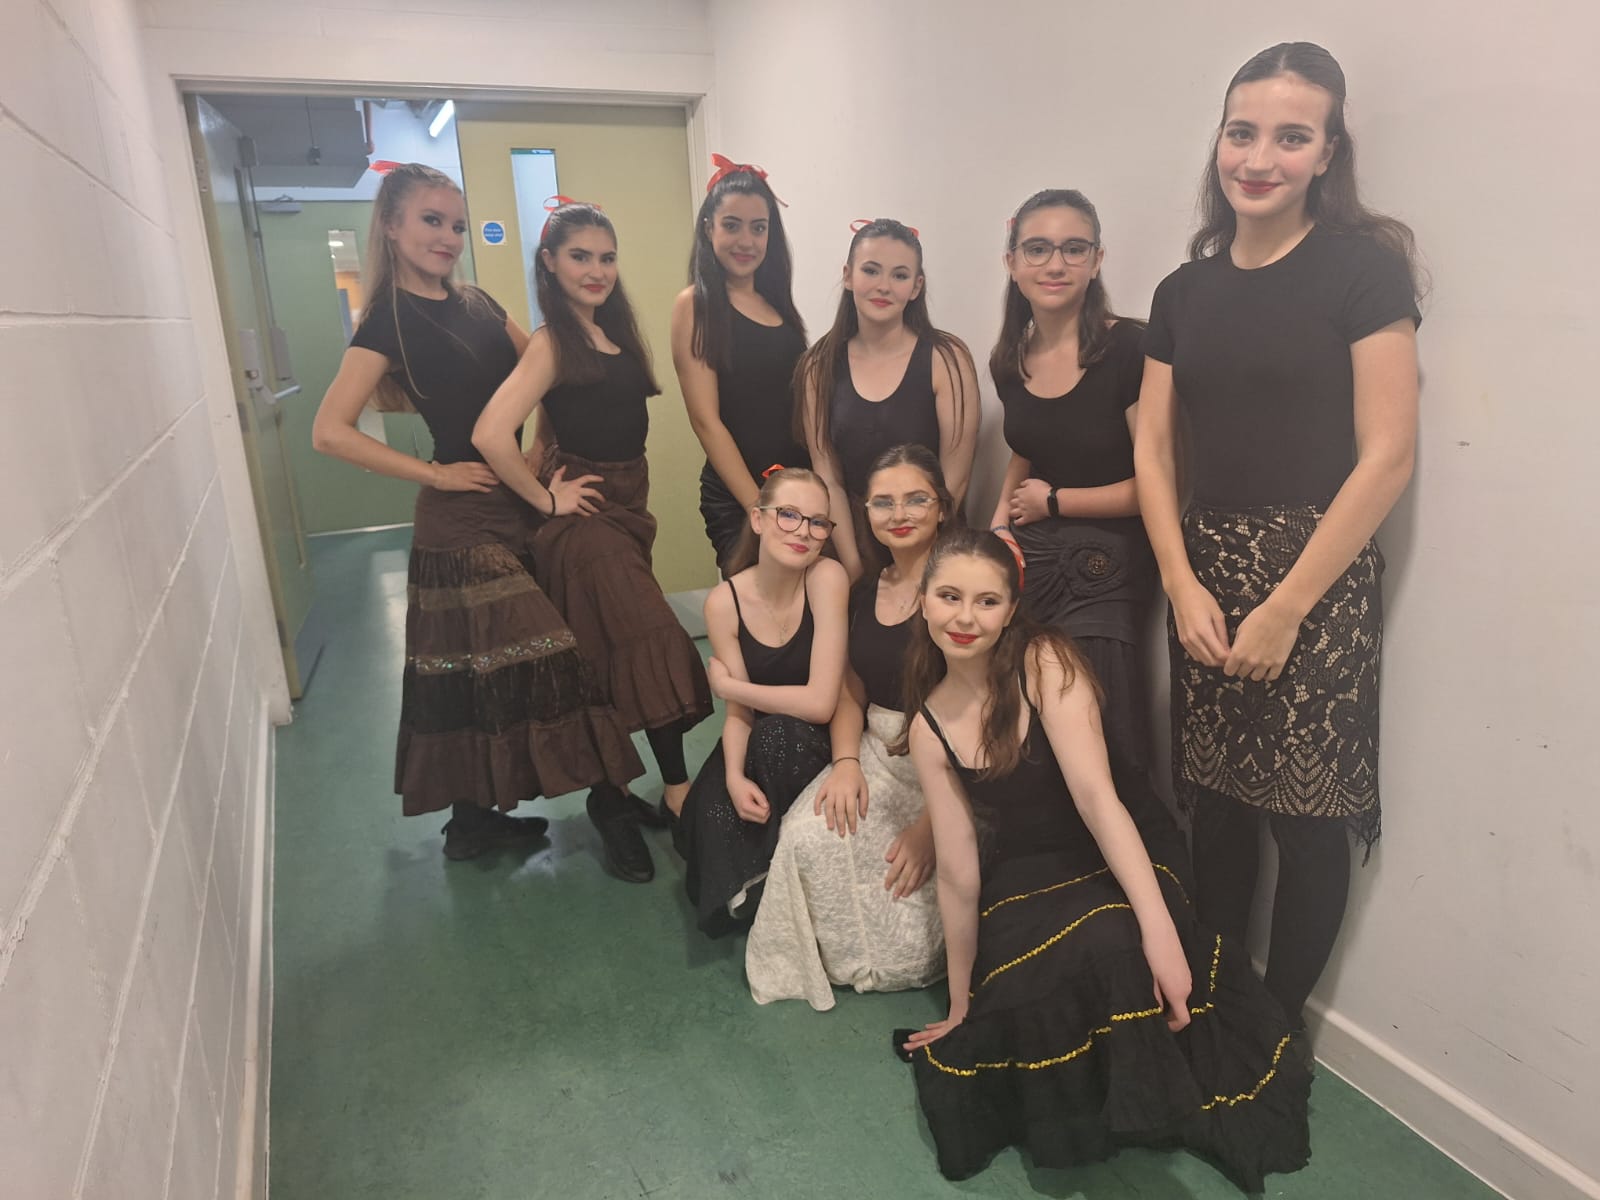 students in their costumes ready to dance at the arts depot